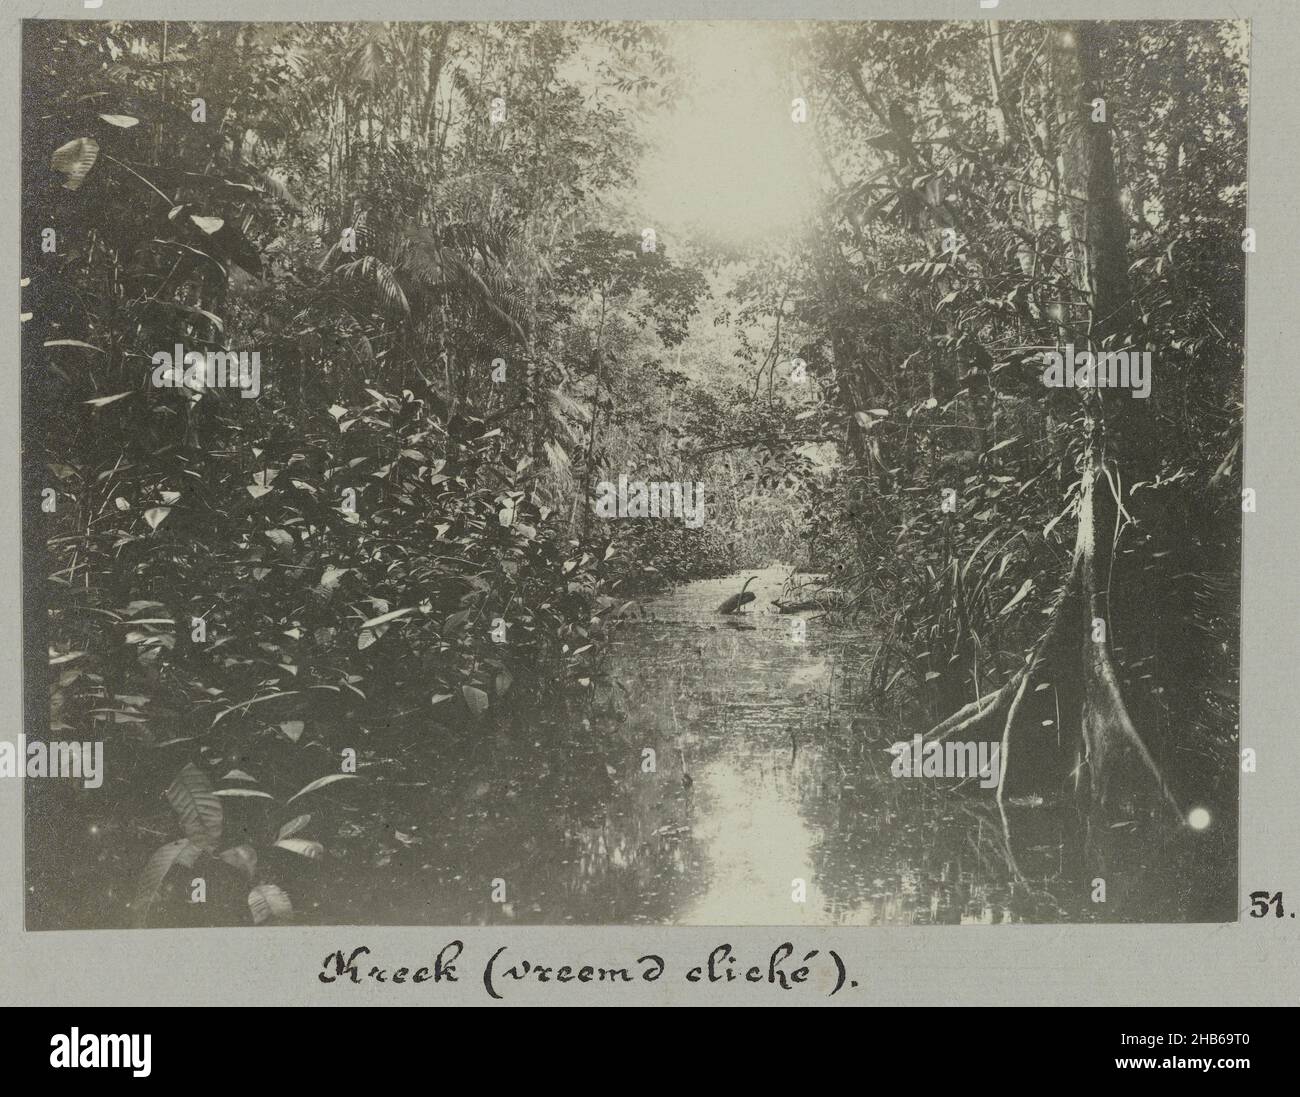 Creek (title on object), Creek in the jungle. Part of the photo album Souvenir de Voyage (part 2), about the life of the Doijer family in and around the plantation Ma Retraite in Suriname in the years 1906-1913., Hendrik Doijer (attributed to), Suriname, 1906 - 1913, photographic support, gelatin silver print, height 82 mm × width 111 mm Stock Photo